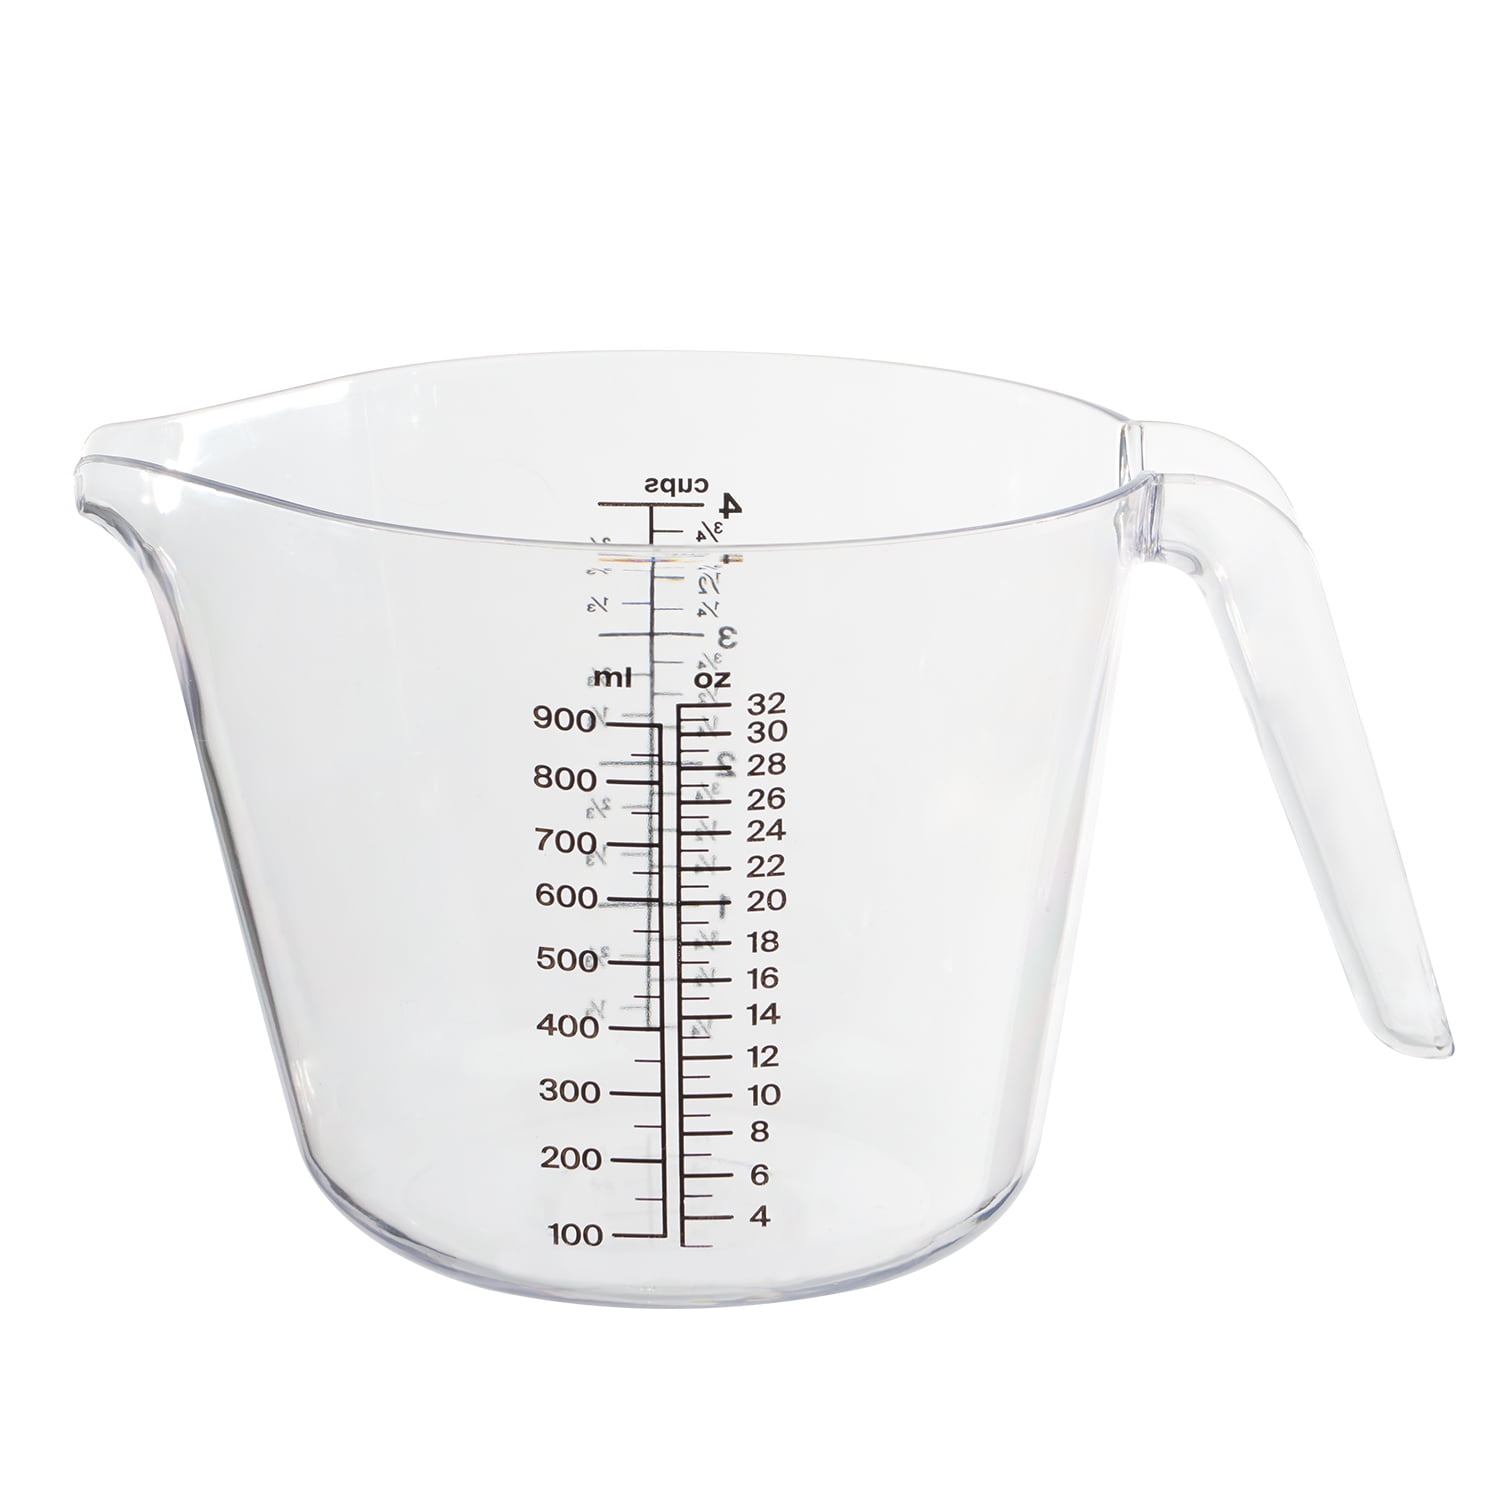 Mainstays Clear Plastic Angled 2 Cup Measuring Cup with Measurements  Labeled in Black. 